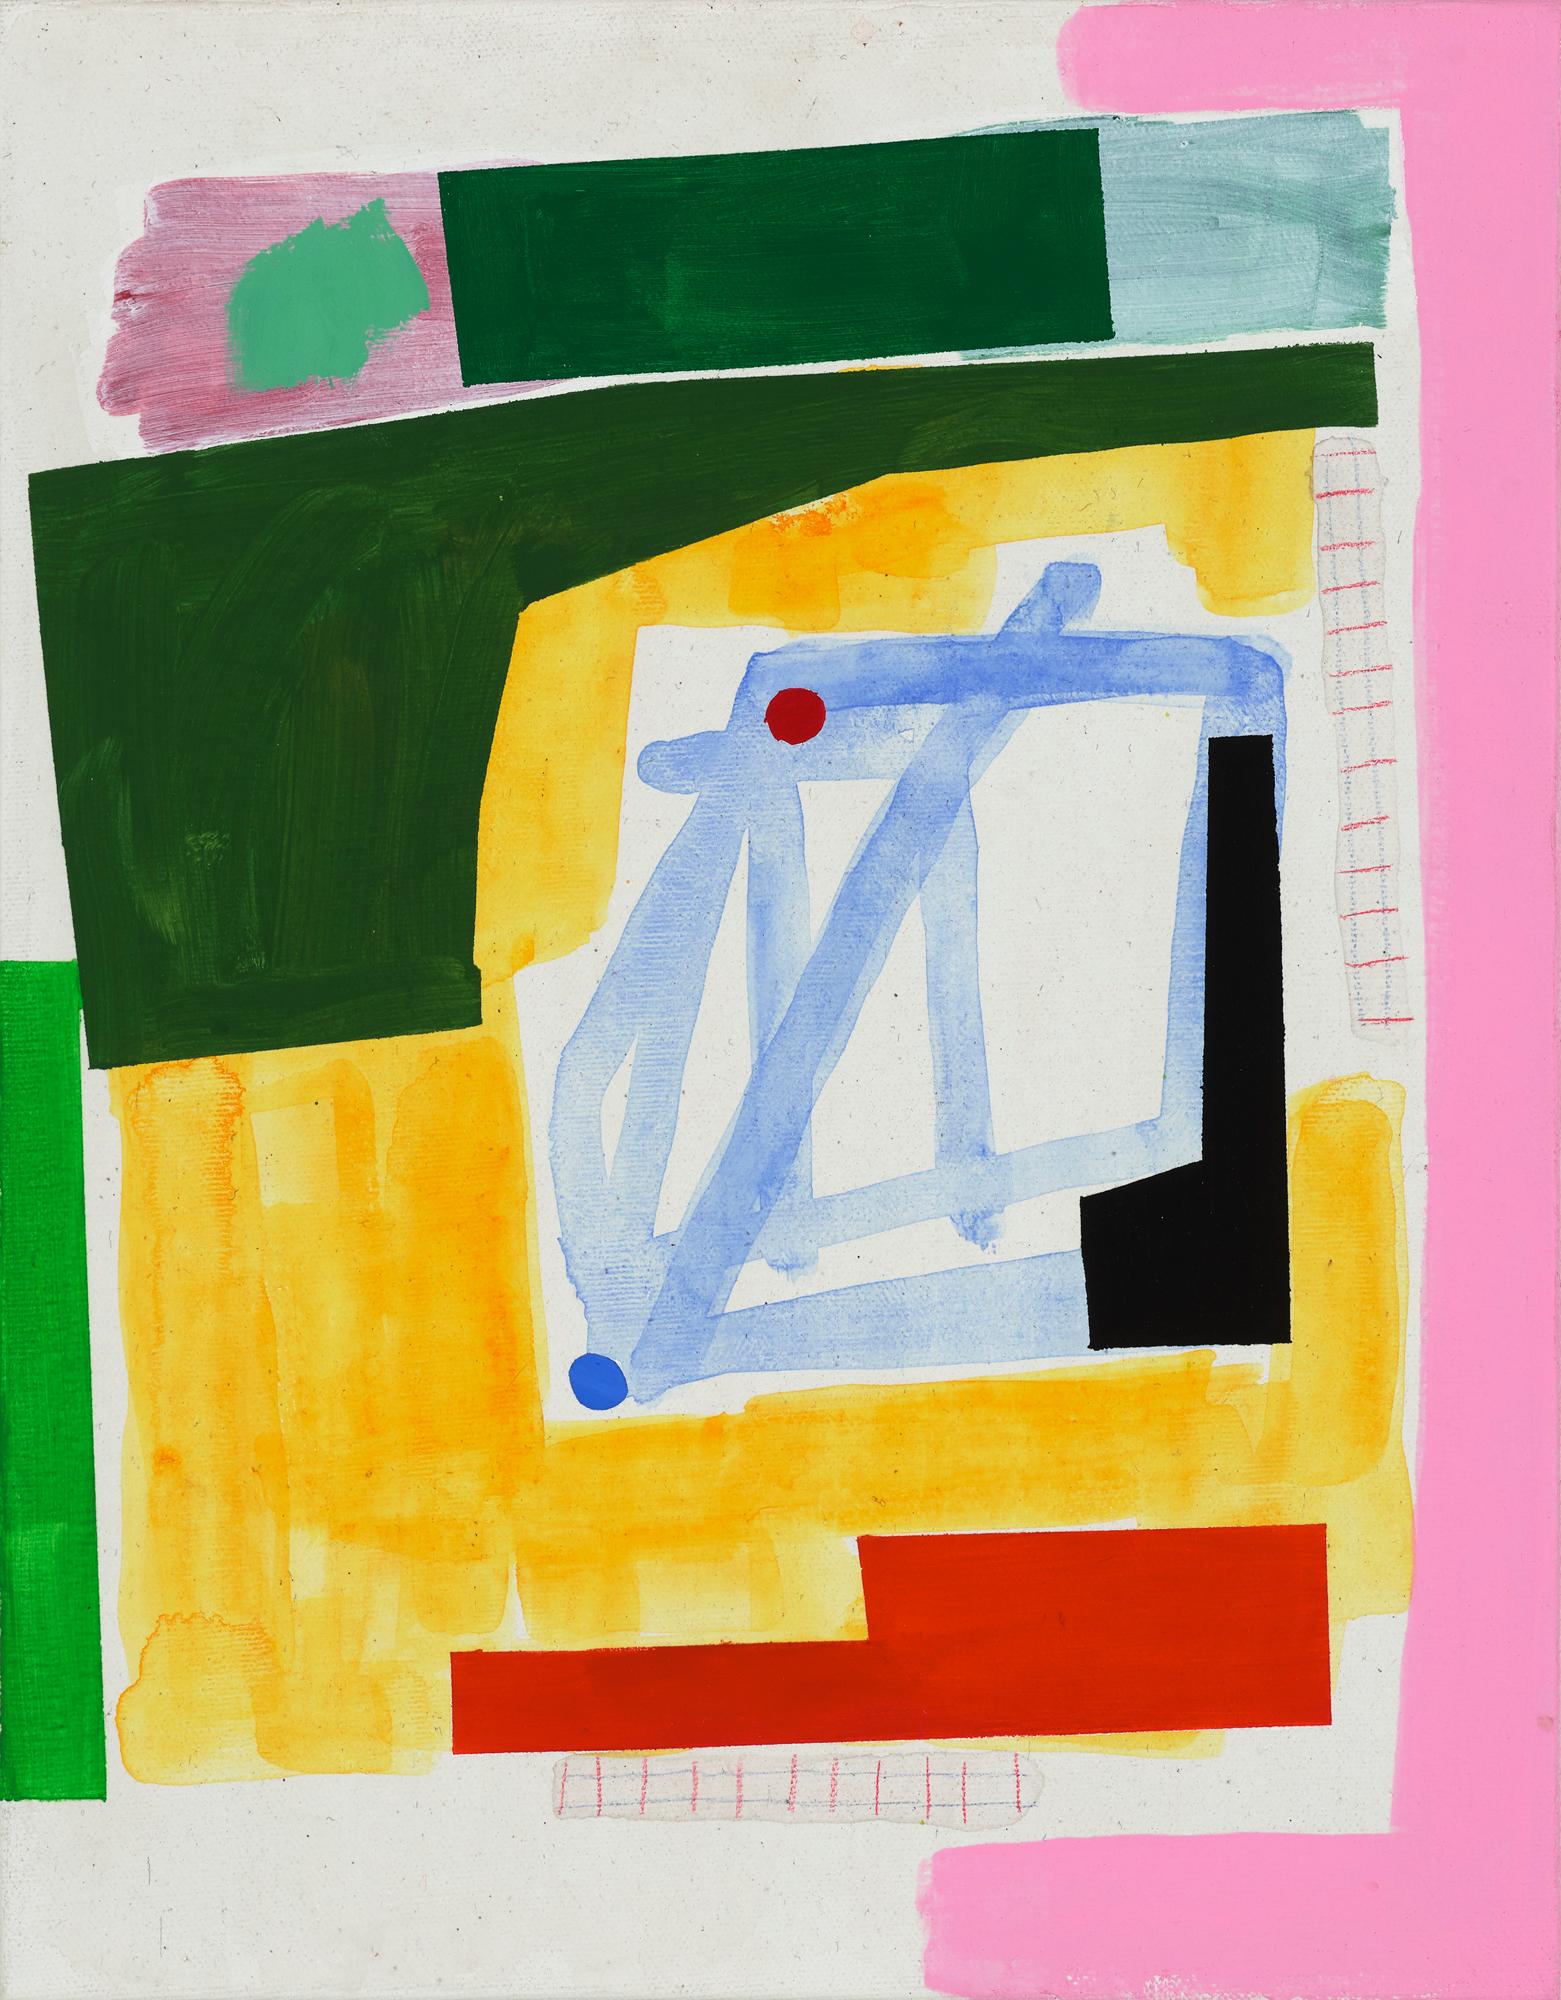 Margo Margolis Abstract Painting - "Perfect Day: Small Abstraction of Green, Yellow, Blue, Red, and Pink"